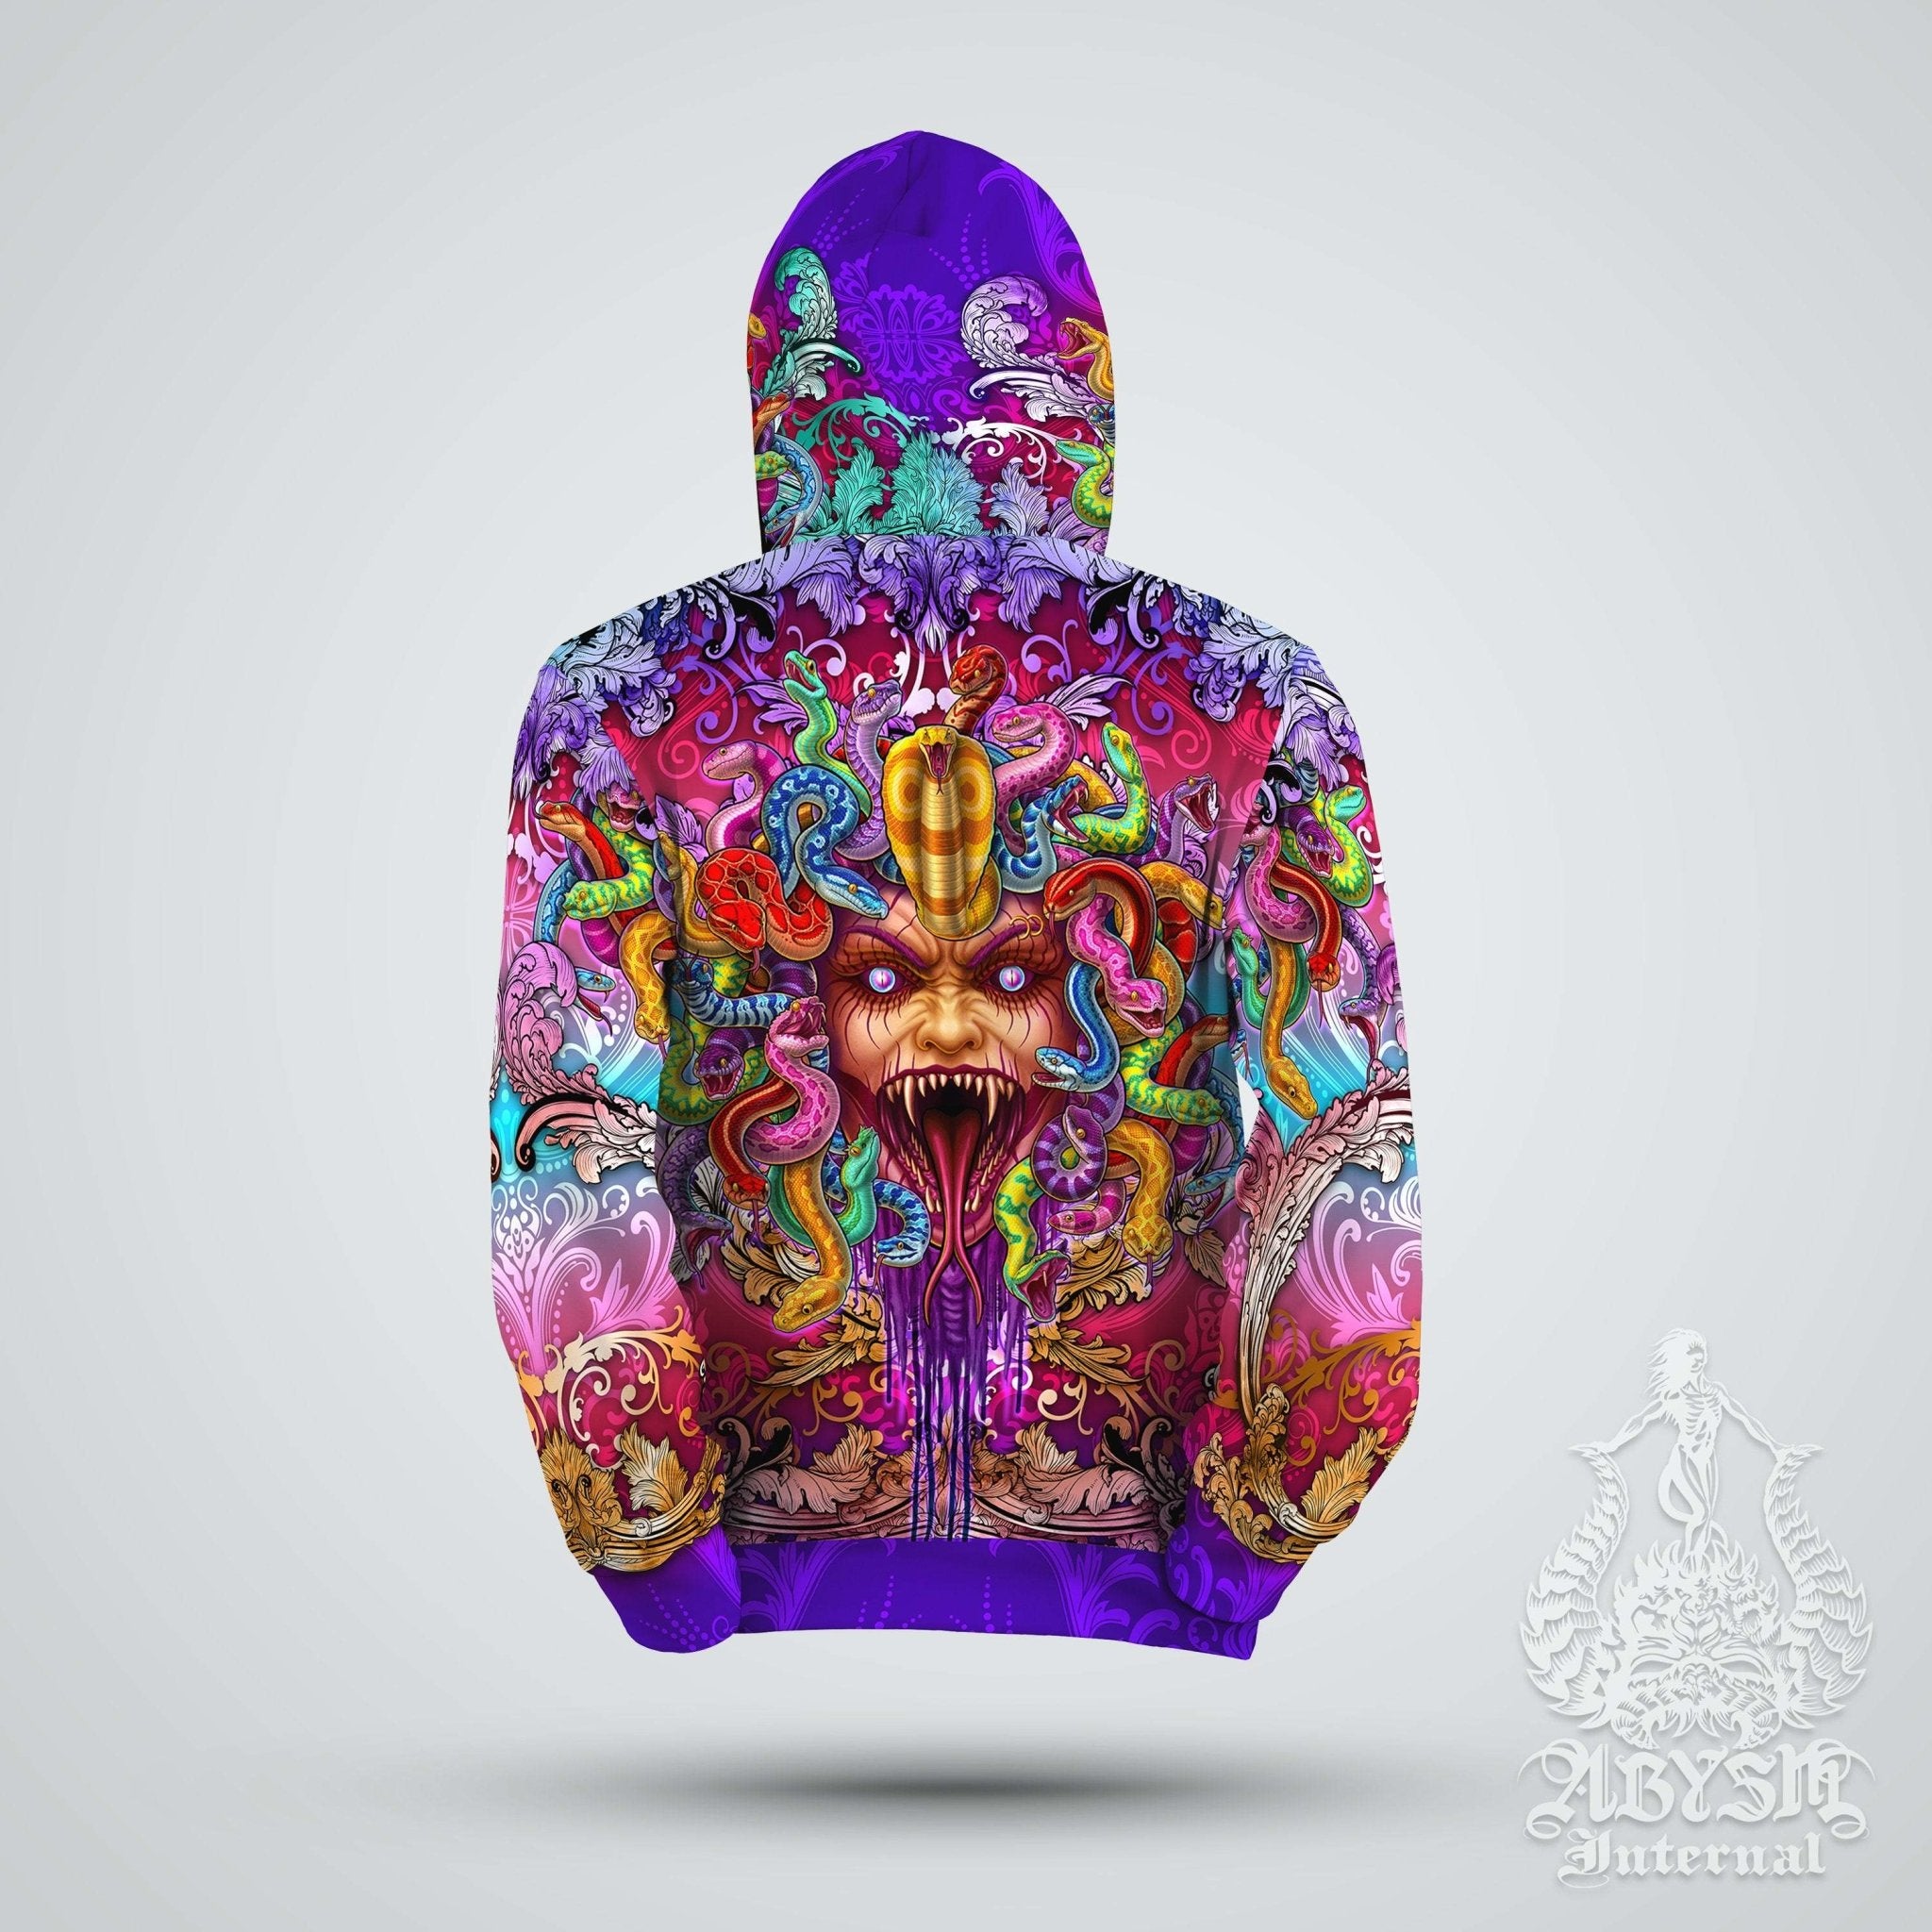 Trippy Hoodie, Rave Outfit, Psychedelic Streetwear, Psy Festival Sweater, Alternative Clothing, Unisex - Enraged Medusa - Abysm Internal